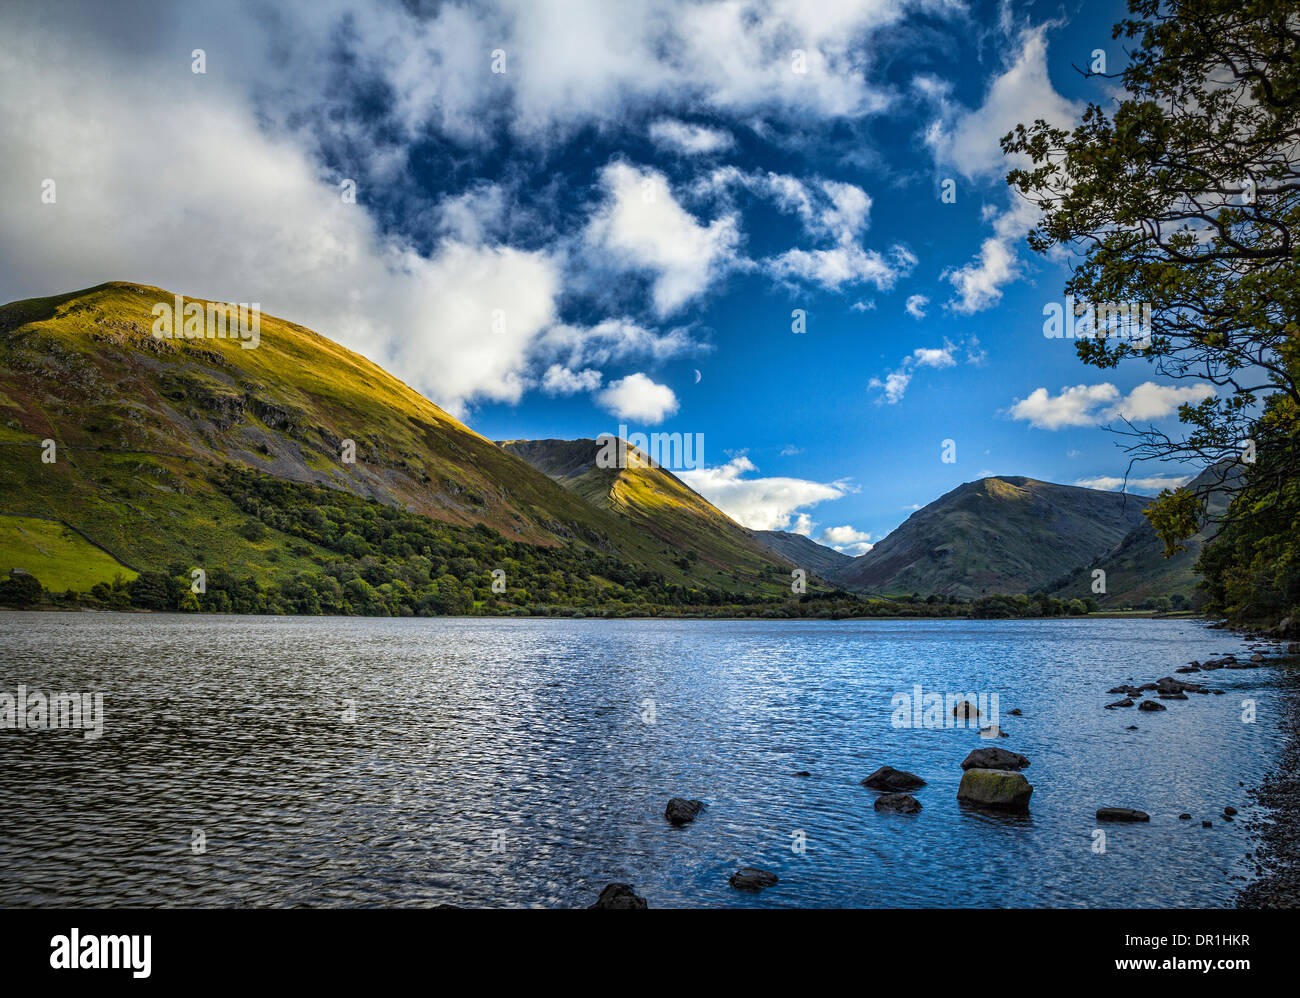 Brotherswater Hartsop et Dodd, Penrith, Lake District, Angleterre Banque D'Images